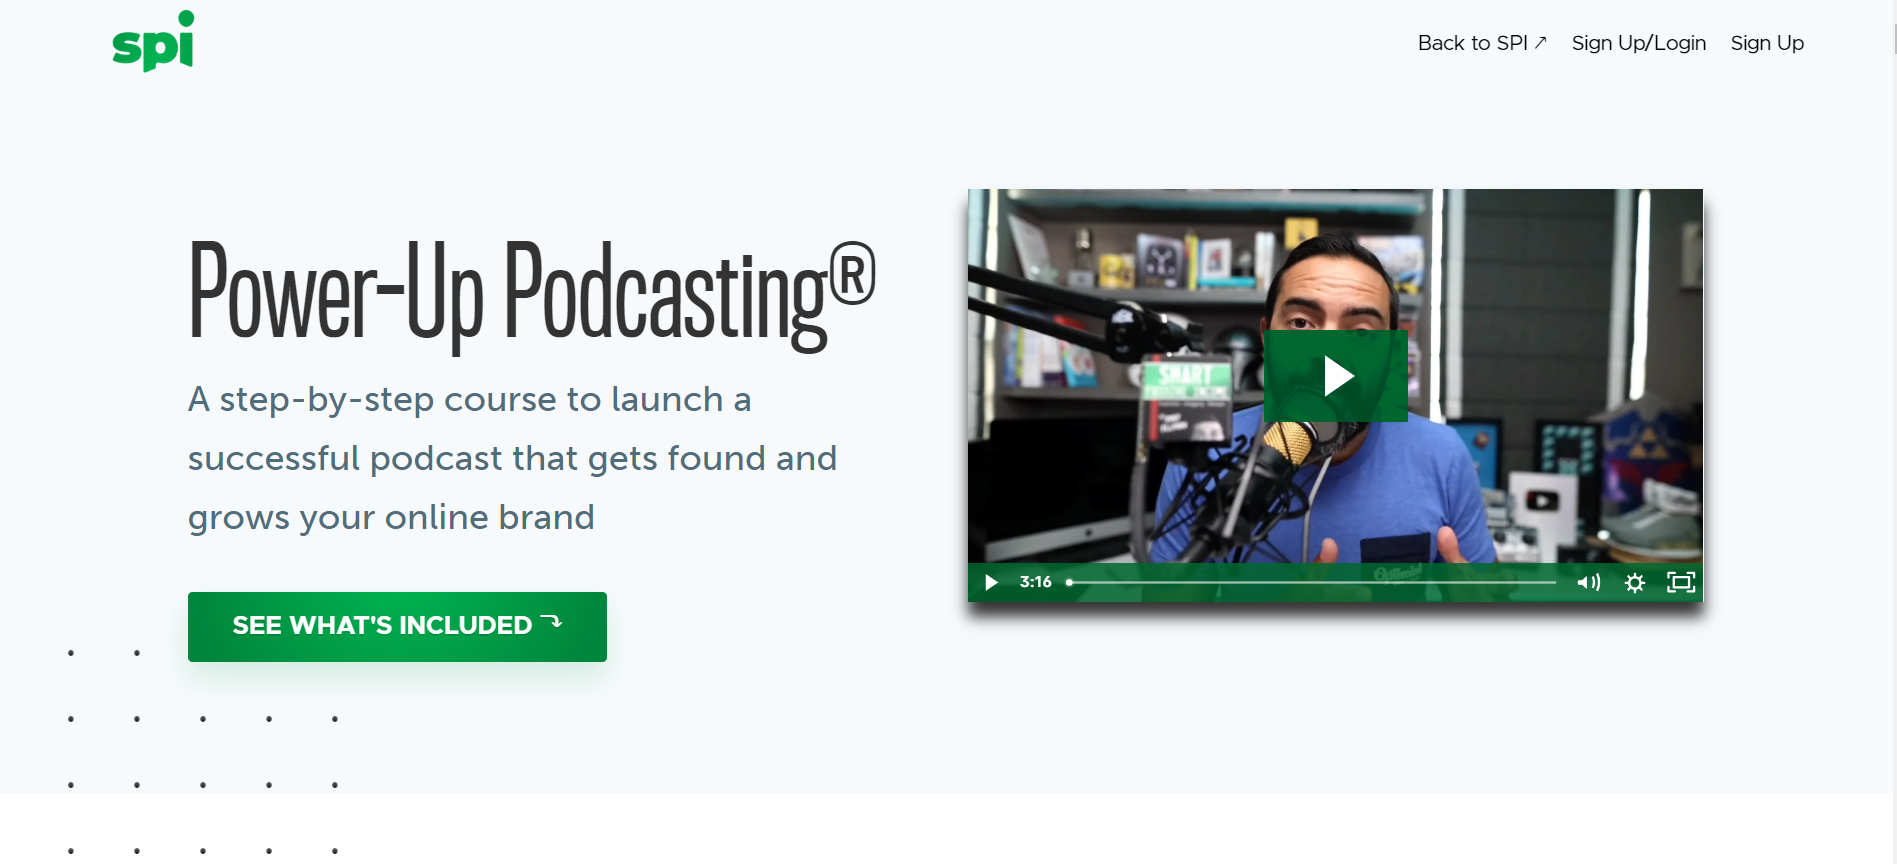 Power-up Podcasting Course